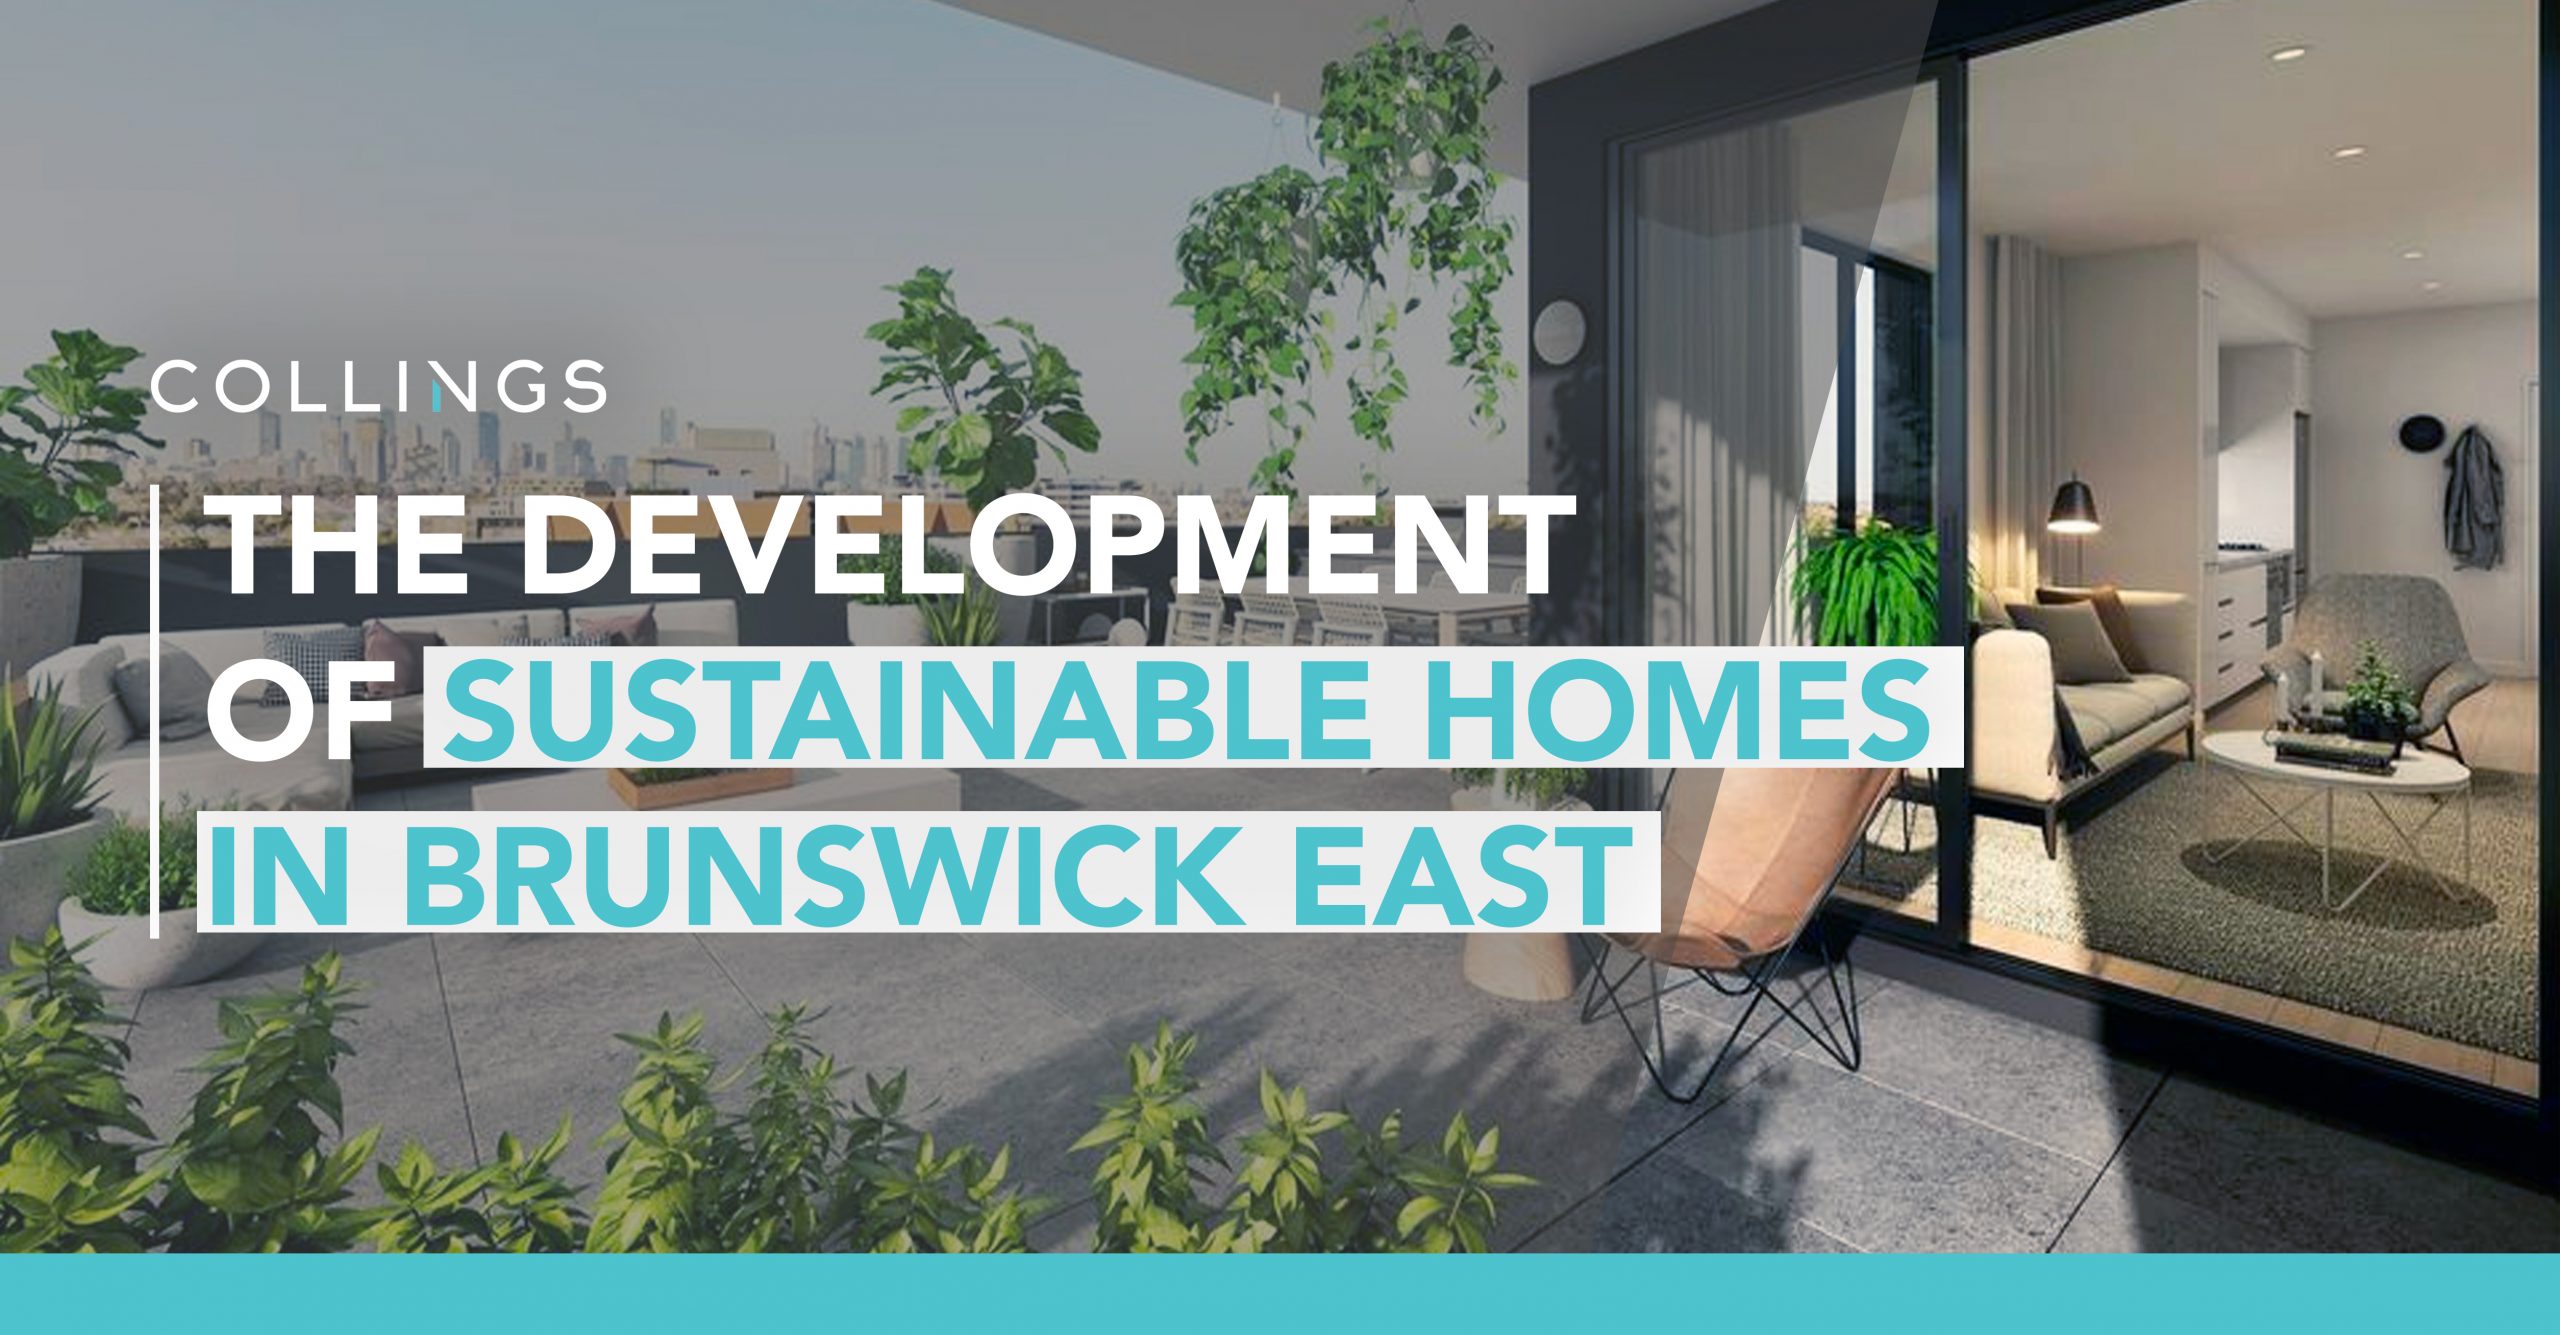 The Development of Sustainable Homes in Brunswick East